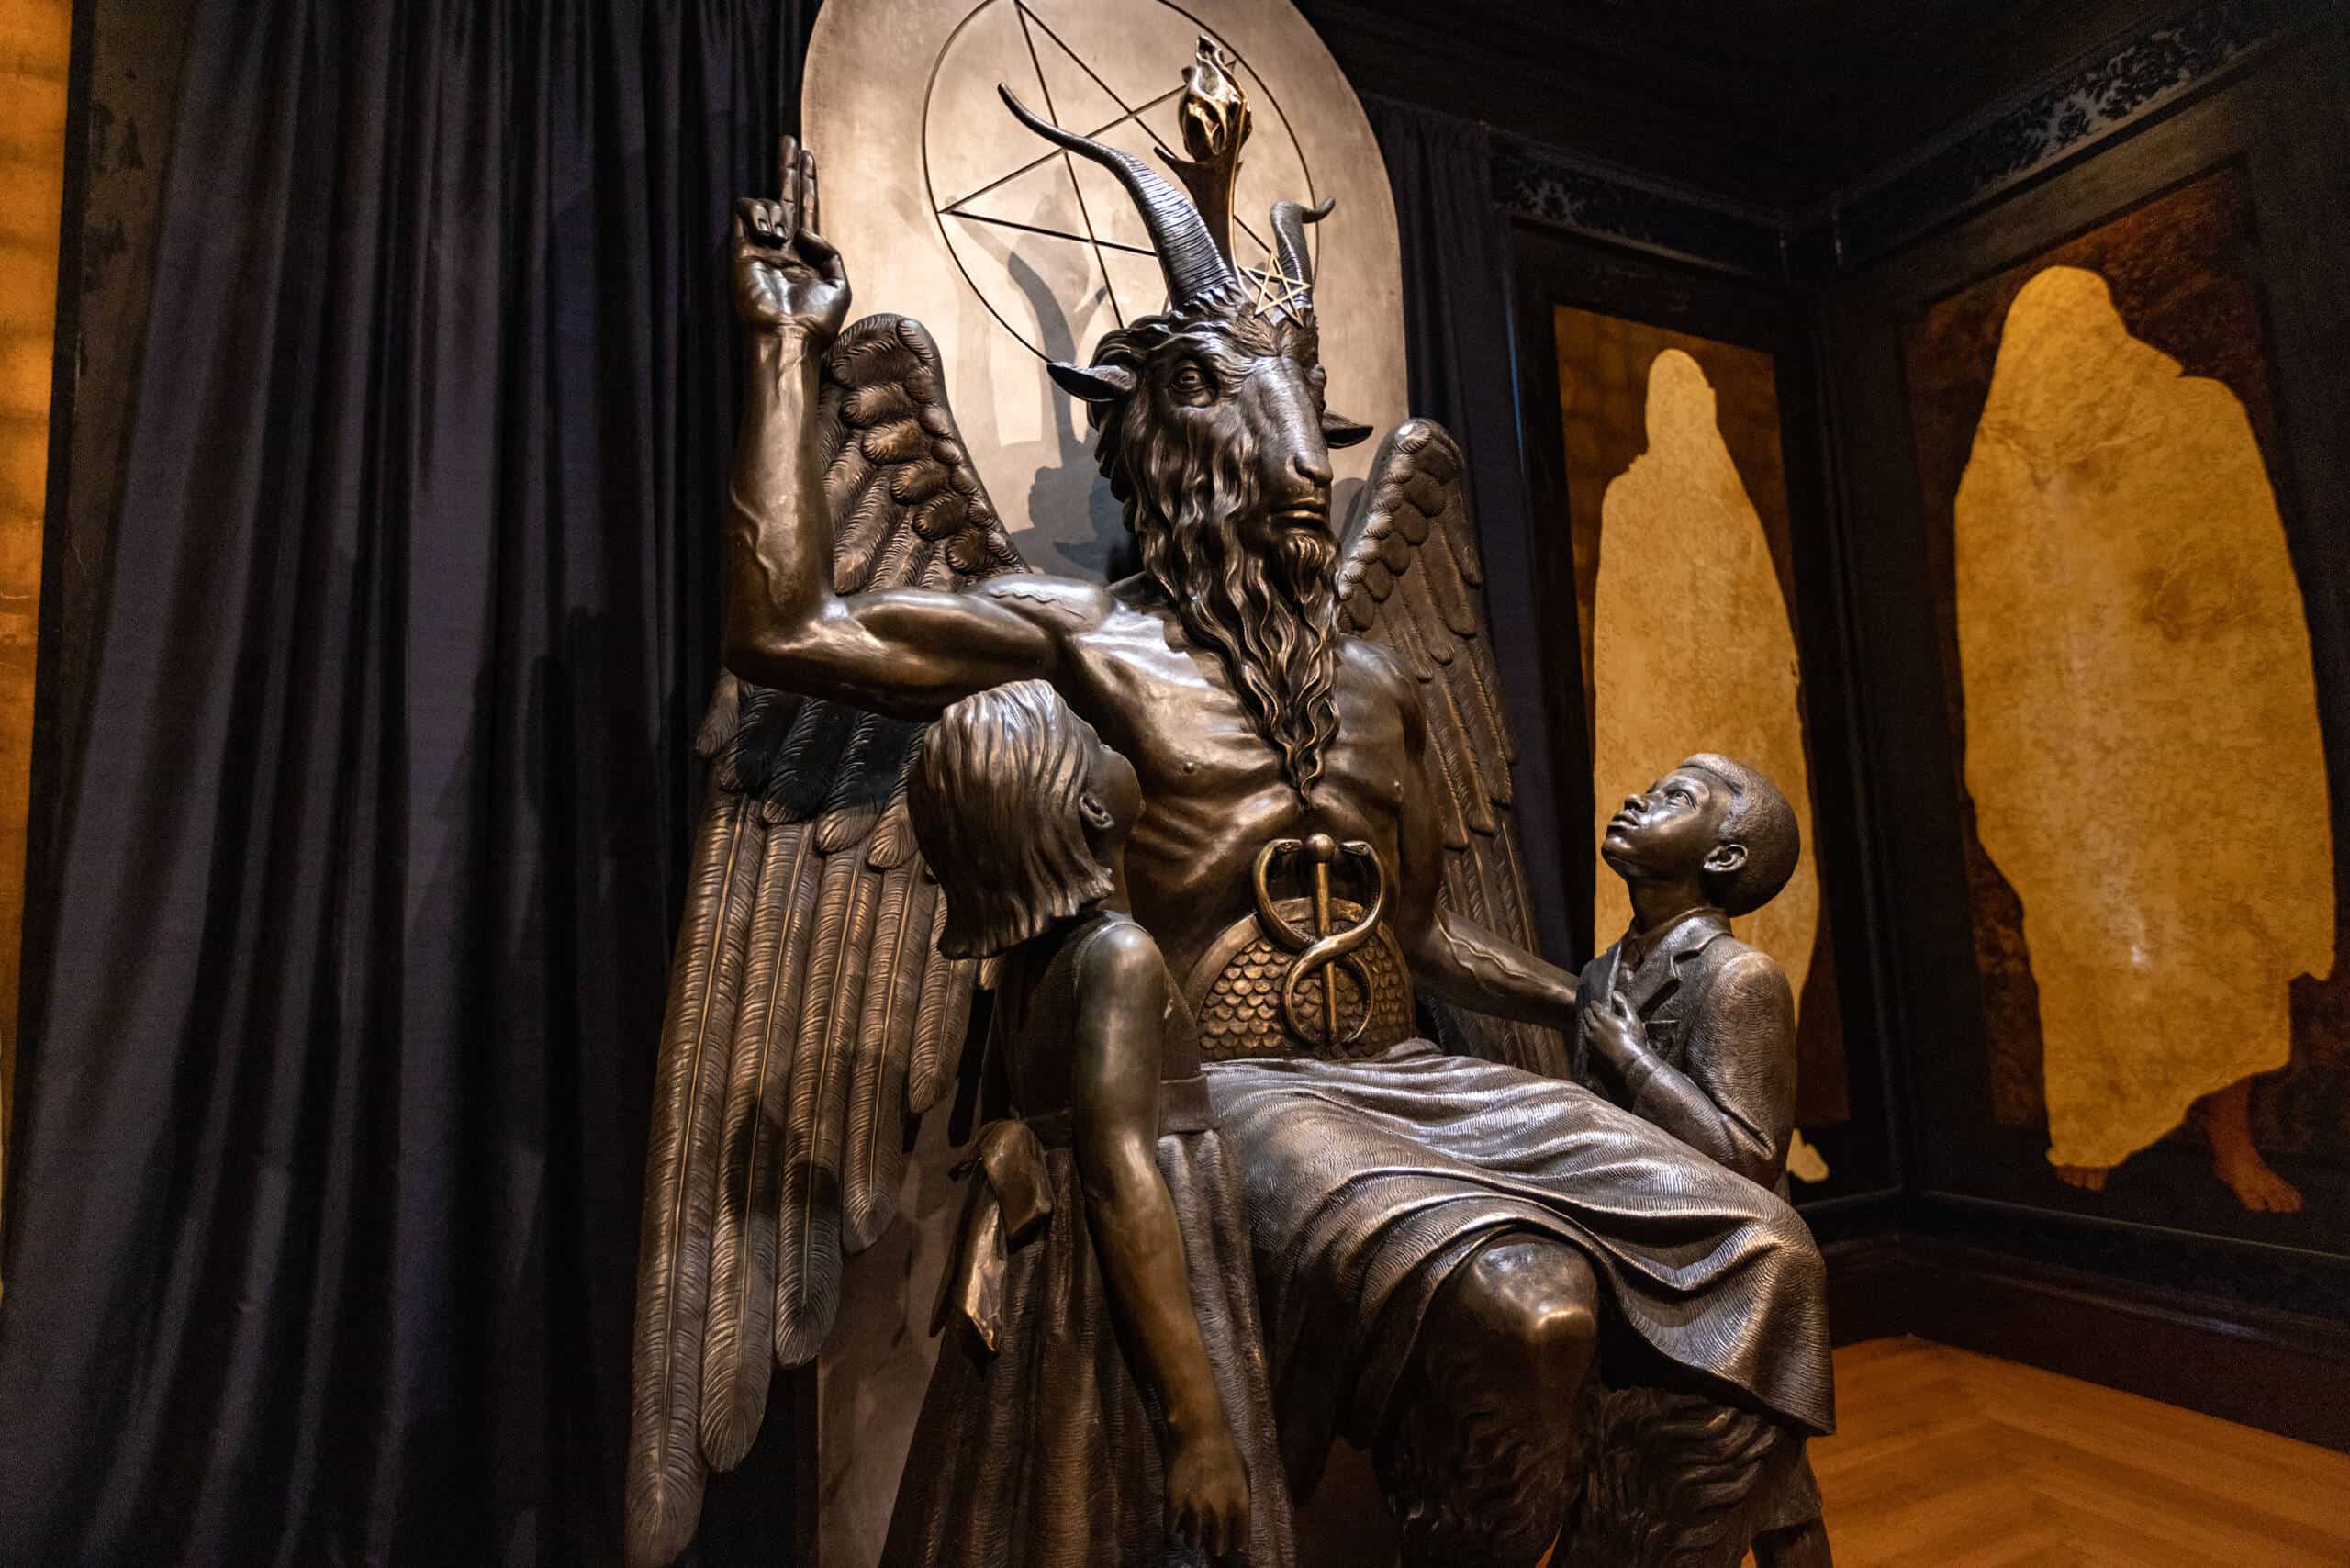 A statue of Baphomet, a winged-goat creature that has long been associated with Satanism, at the Satanic Temple in Salem. (Jesse Costa/WBUR)